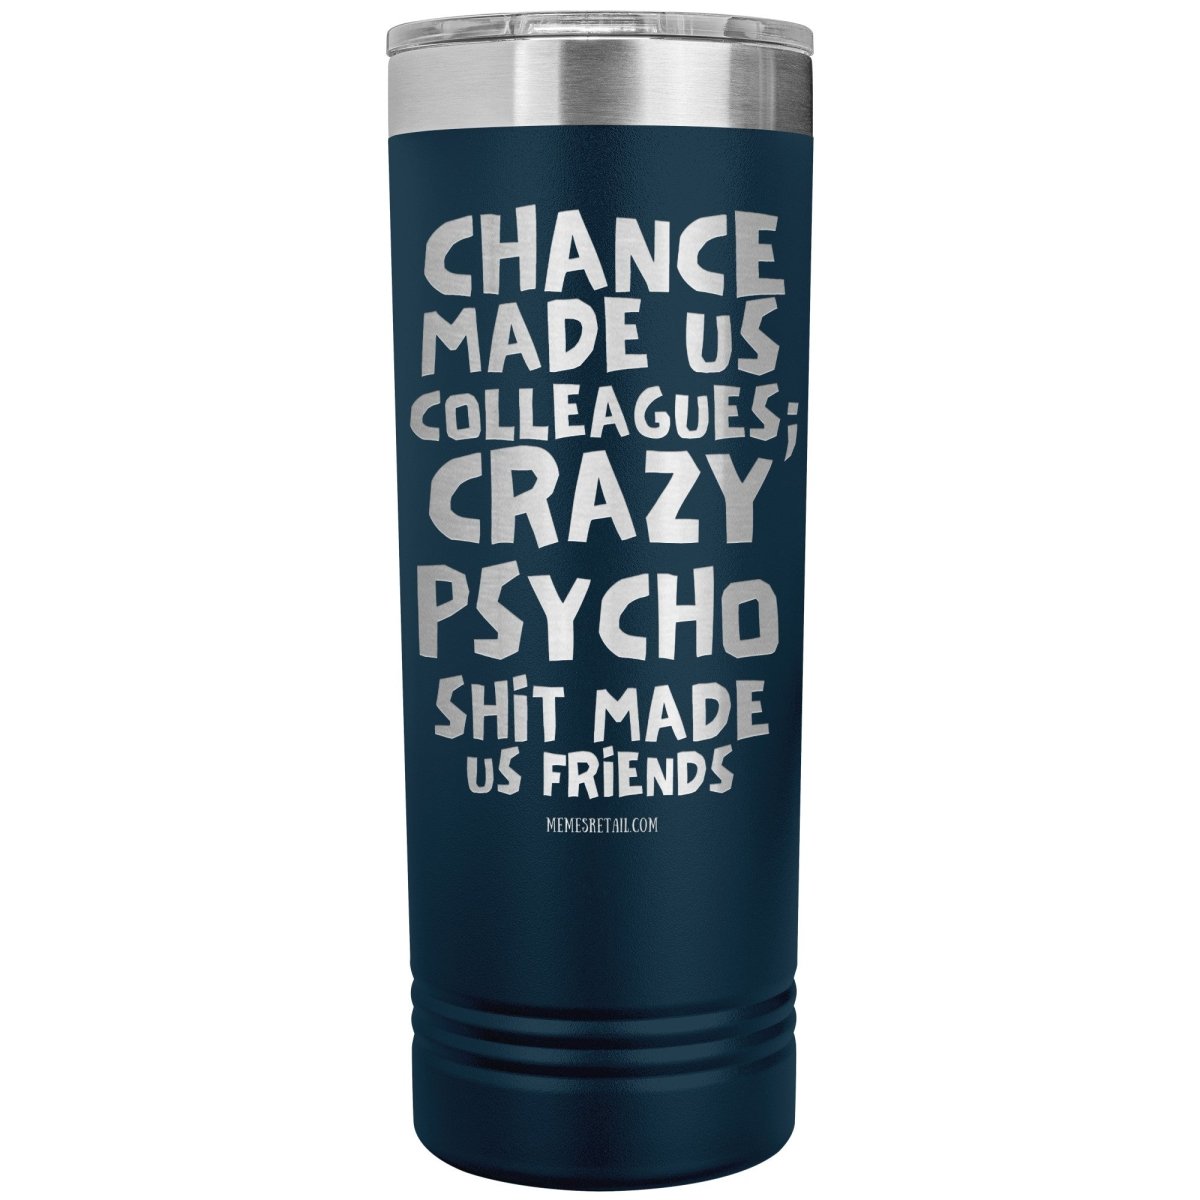 Chance made us colleagues; skinny tumblers - Memes Retail